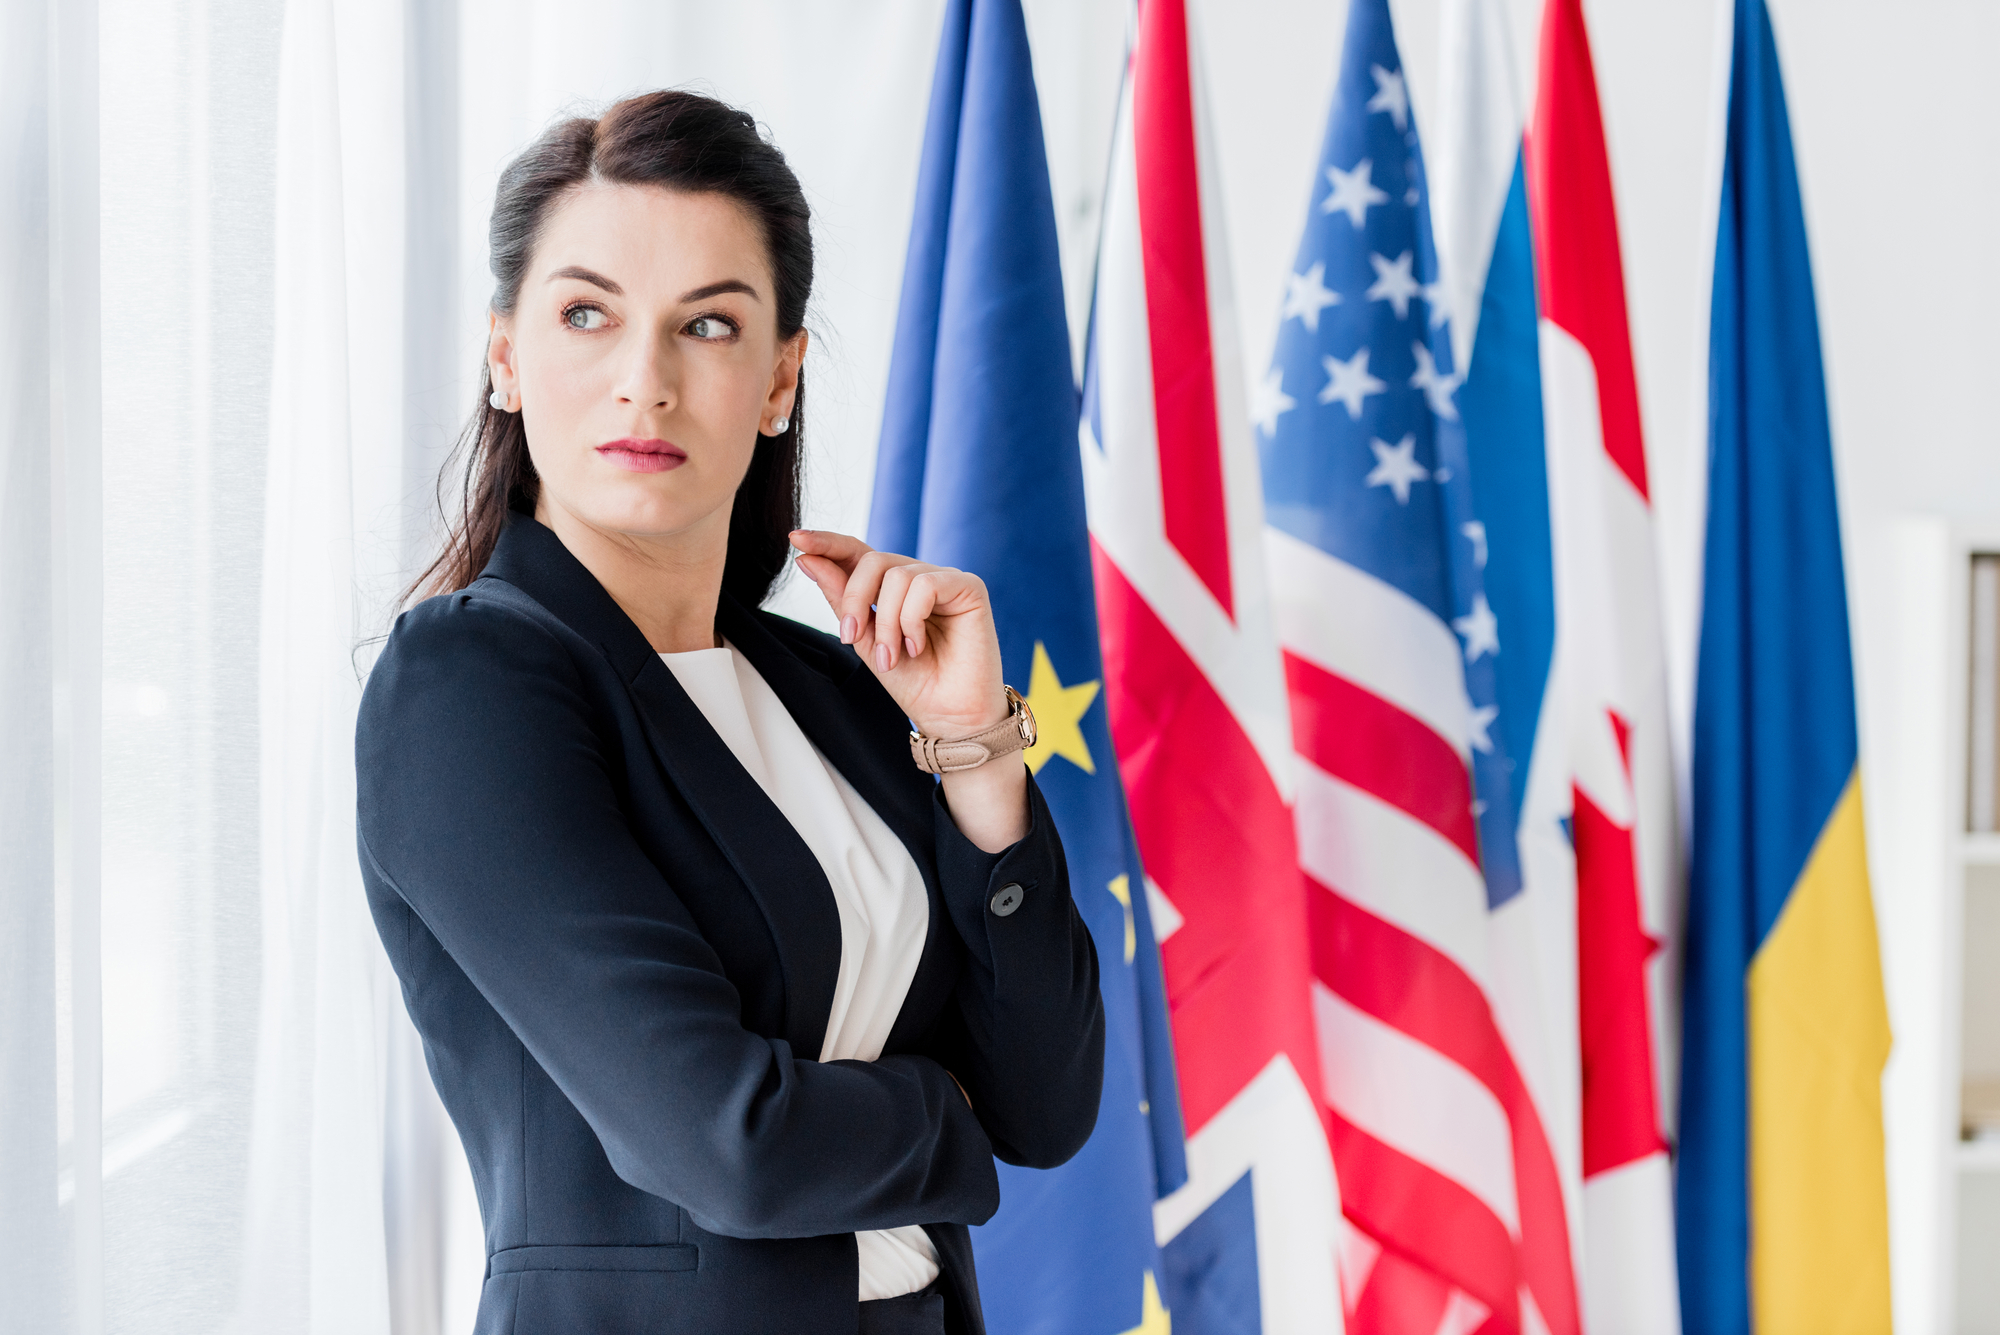 Attractive diplomat looking away while standing near flags